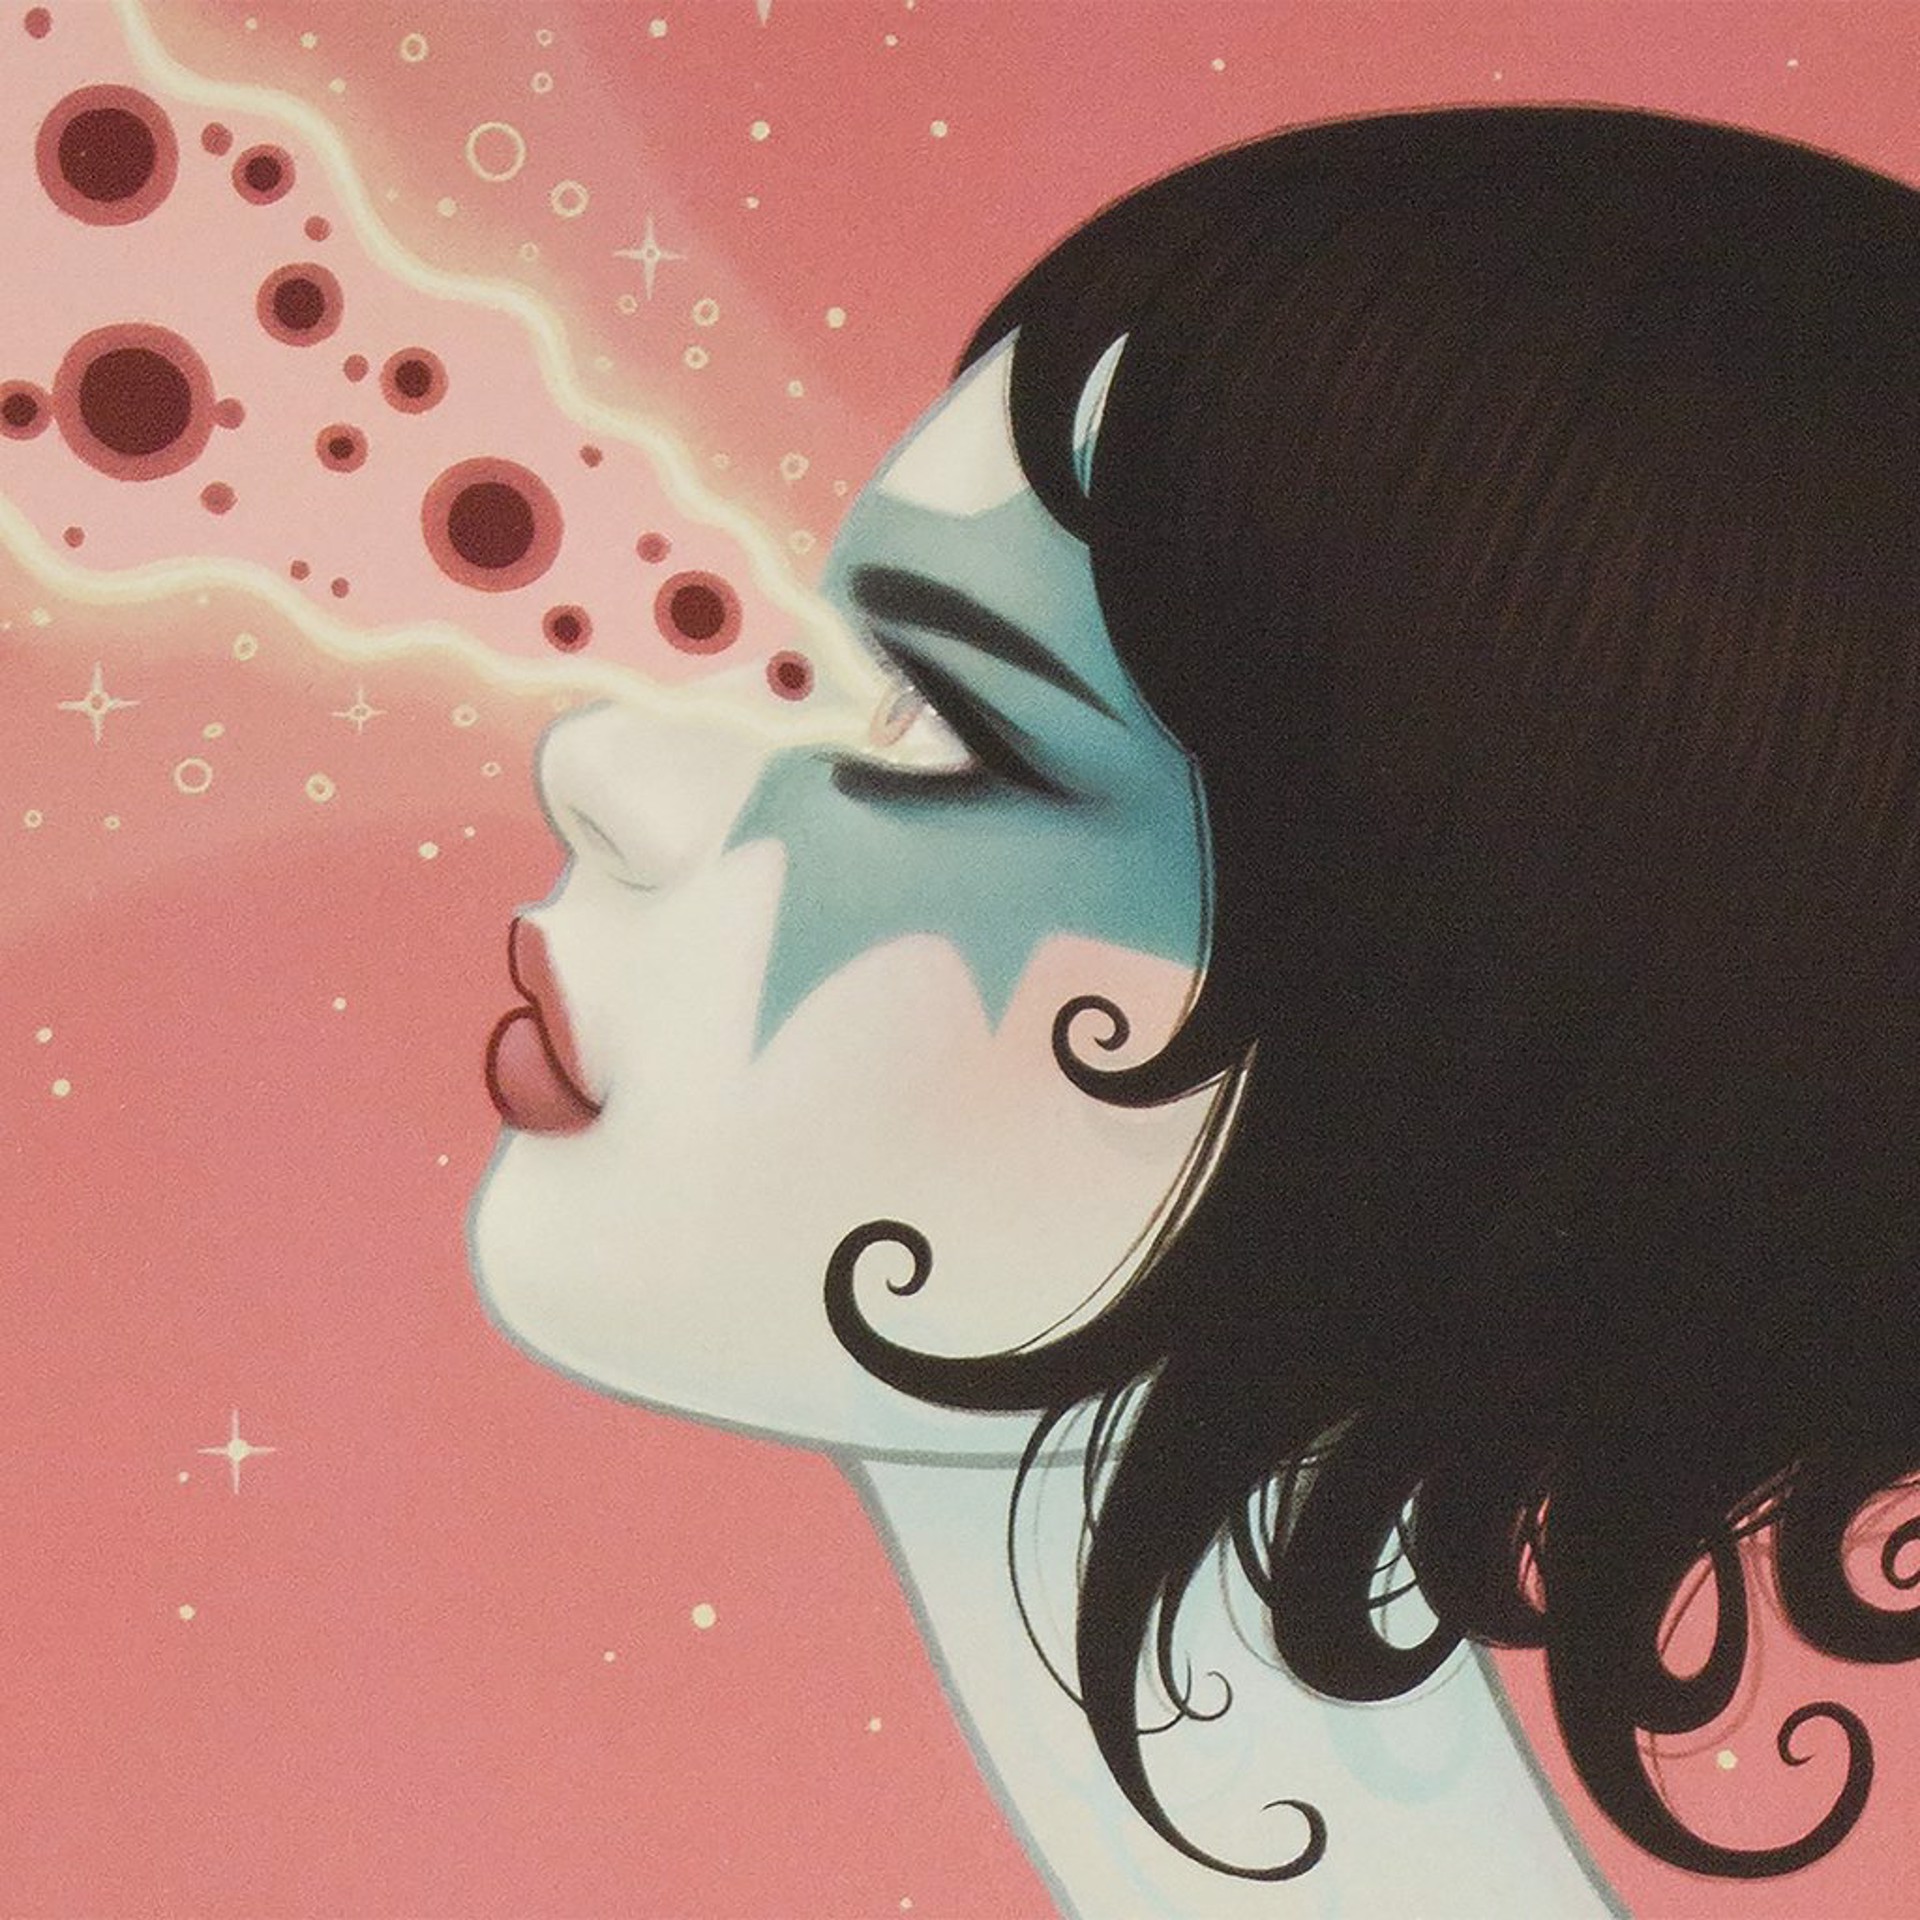 Magnetic Destroyer (70/250) by Tara McPherson